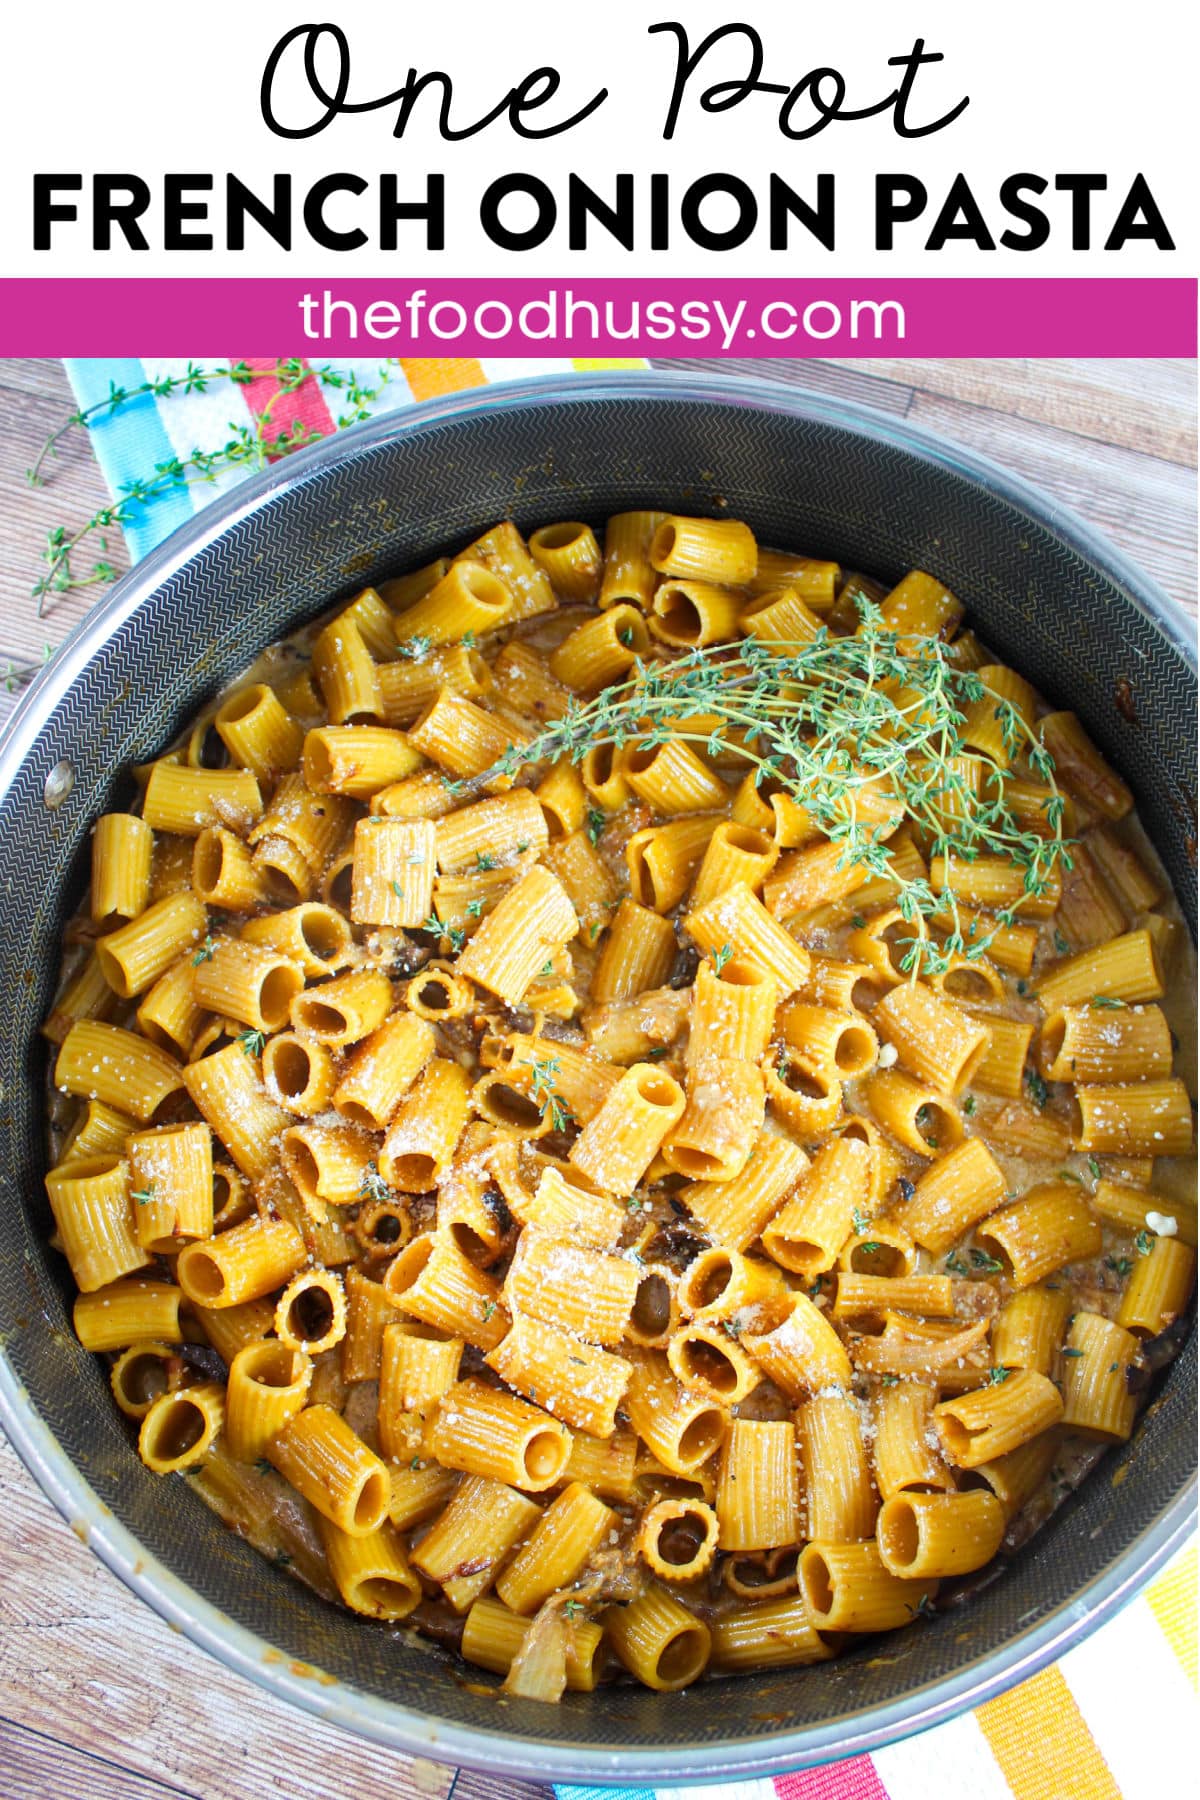 This rich and decadent One Pot French Onion Pasta is reminiscent of French Onion Soup with caramelized onions in a creamy beefy sauce. The addition of rigatoni pasta and mushrooms makes it a complete meal and one you'll love!  via @foodhussy